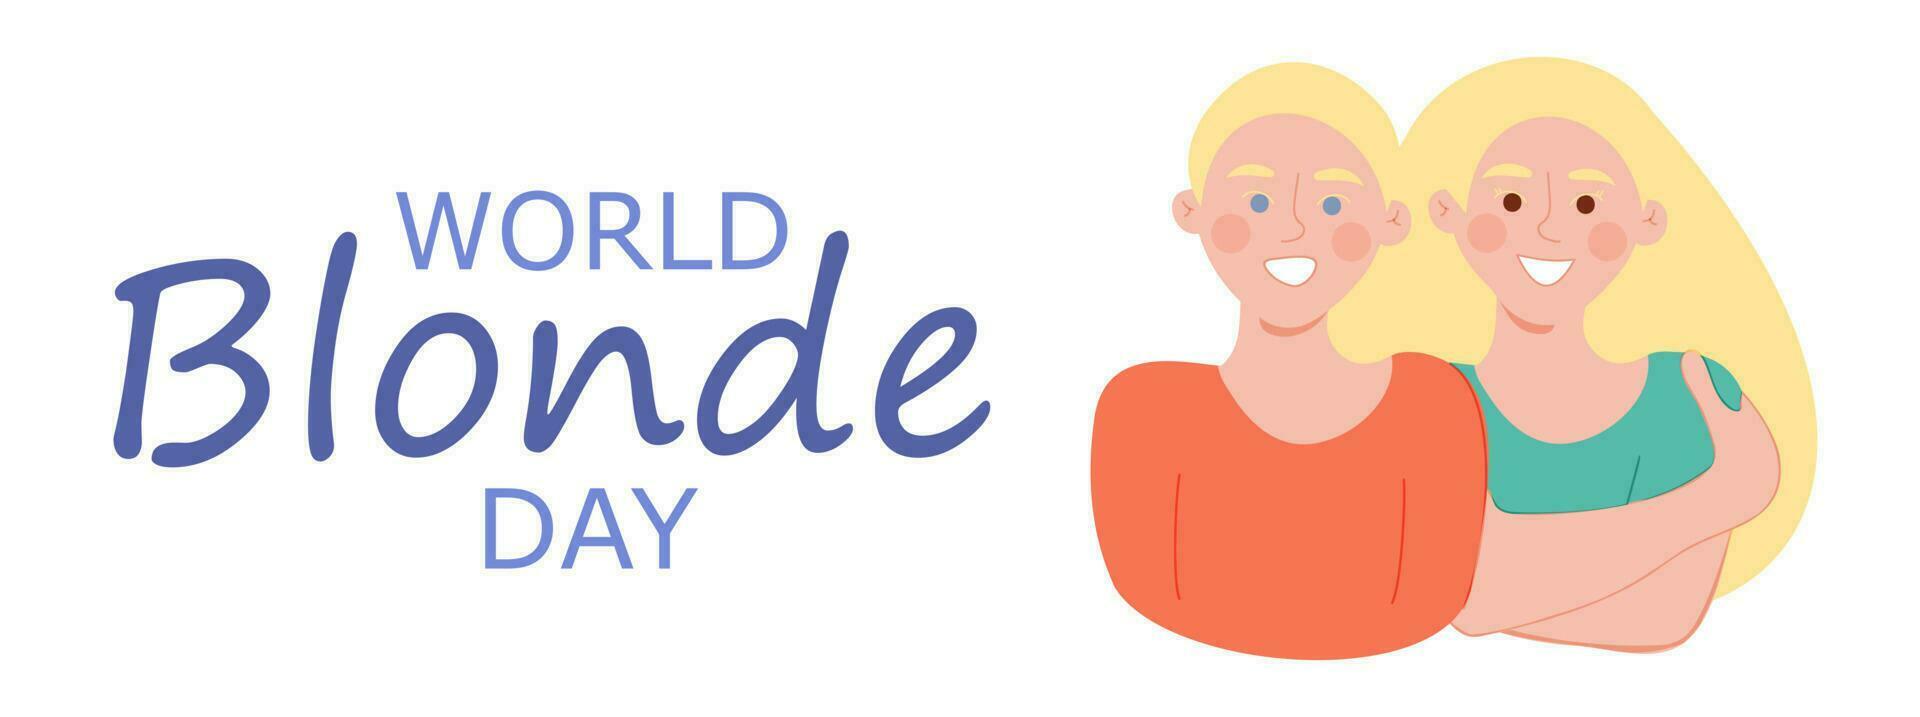 World blonde day poster with man and woman vector illustration